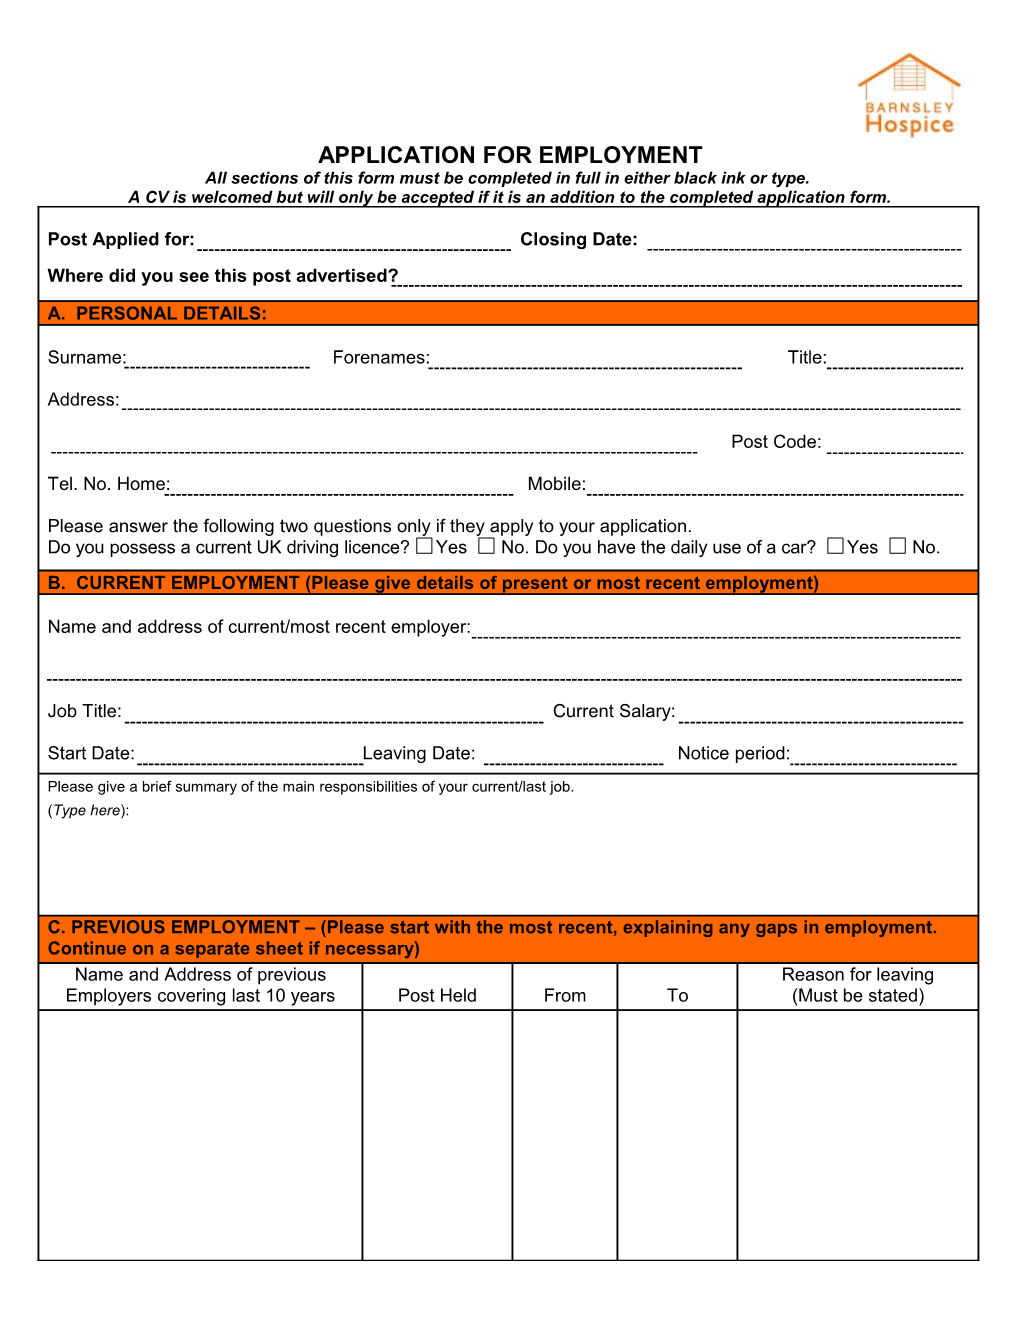 All Section of This Form Must Be Completed in Full in Either Black Ink Or Type